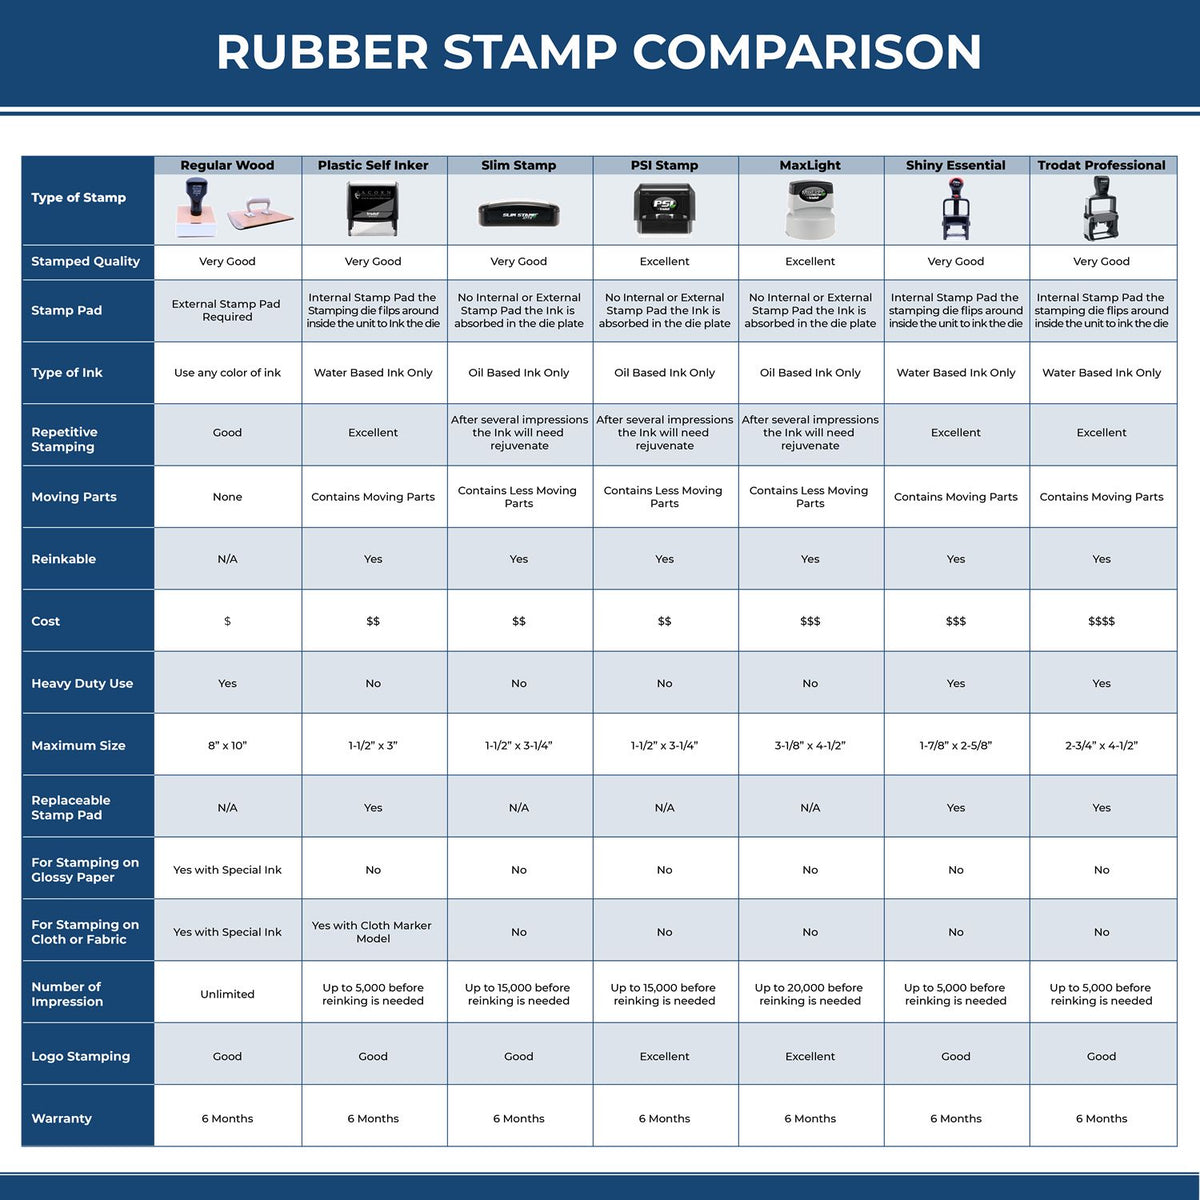 Large File Copy with Drawer Rubber Stamp 5656R Rubber Stamp Comparison